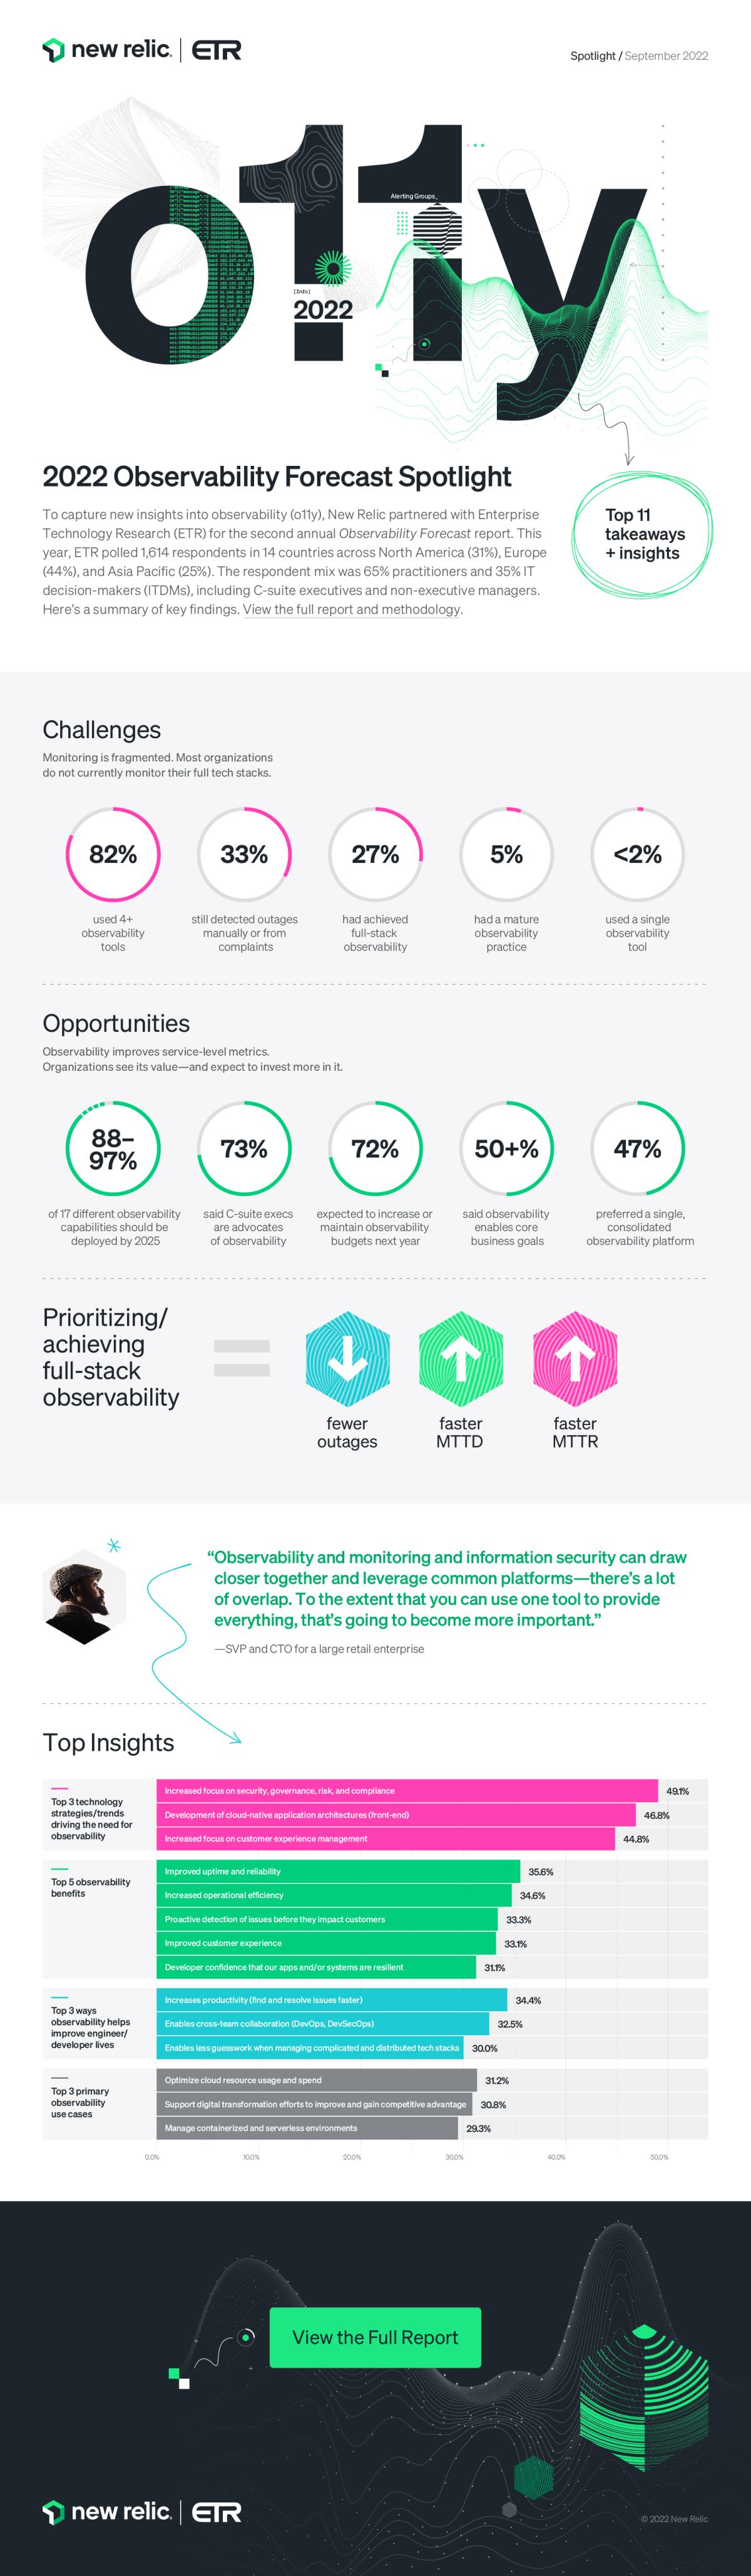 New Relic 2022 Observability forecast infographic